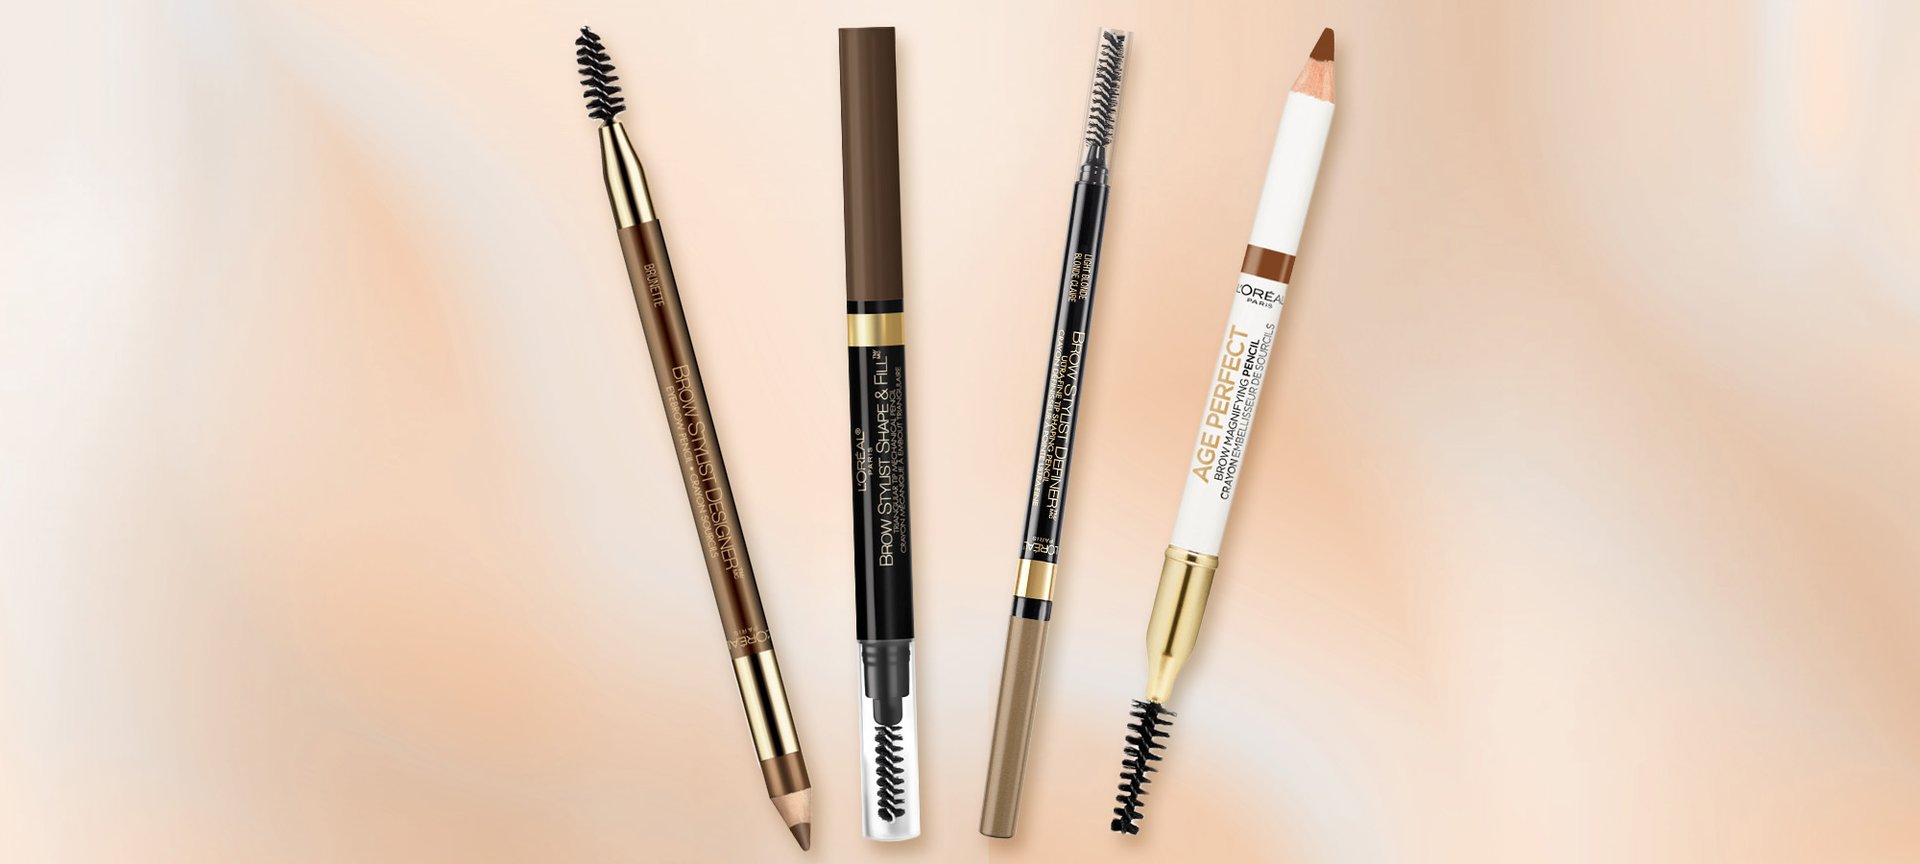 Four Loreal Paris Drugstore Eyebrow Pencils On A Beige Background